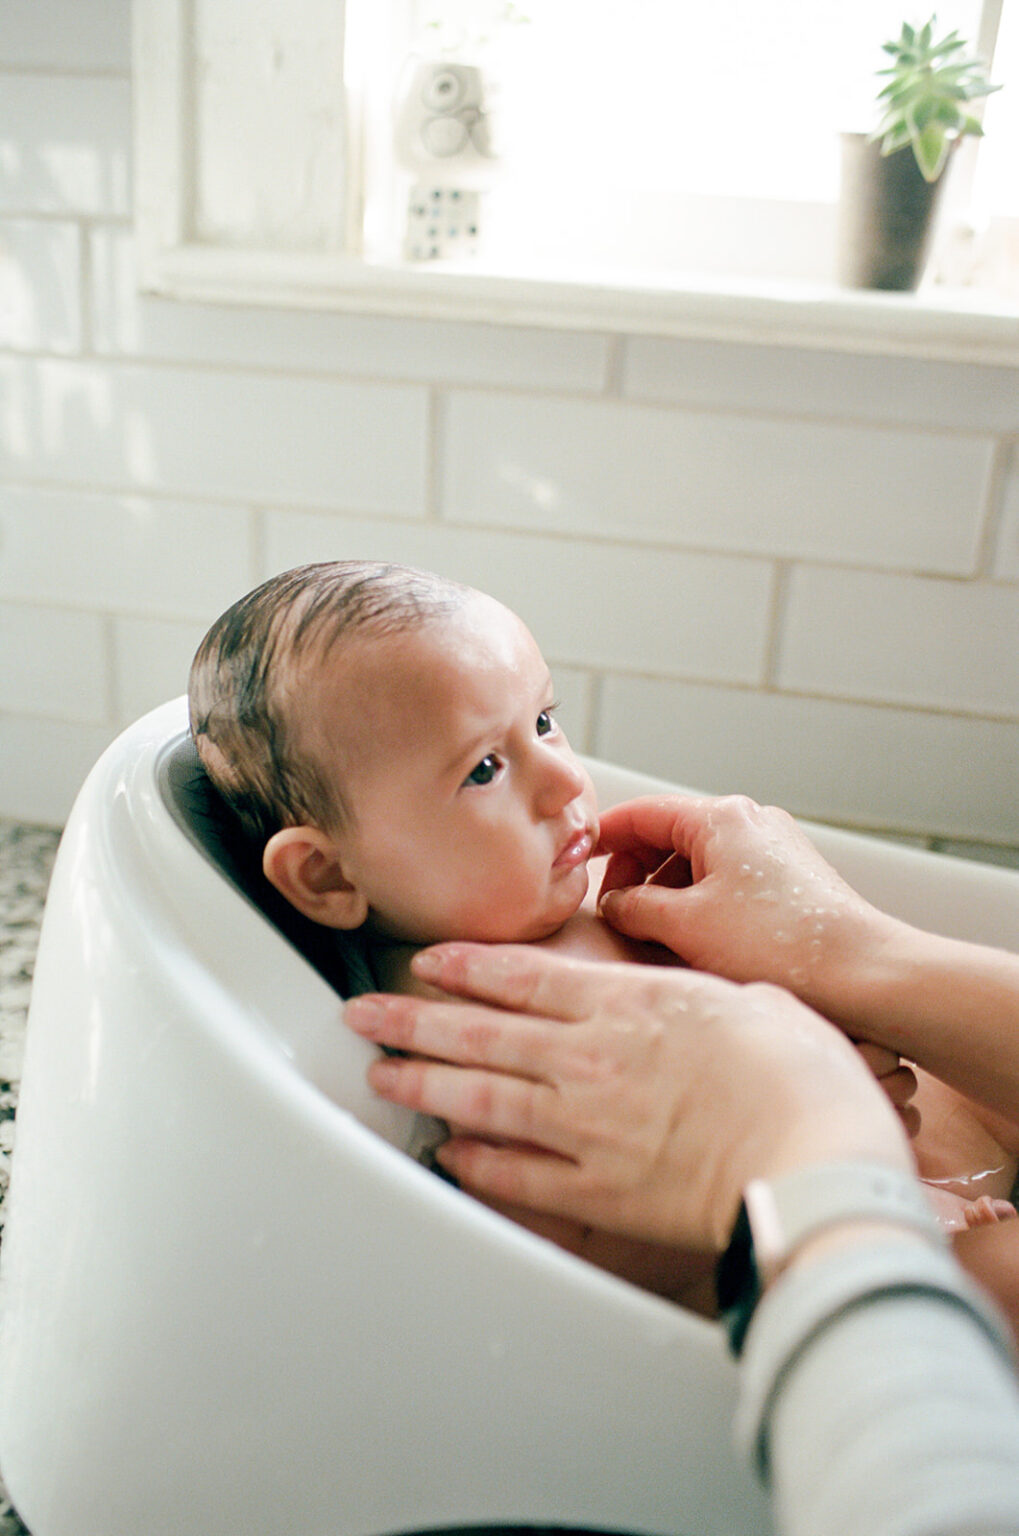 woman bathes baby in sink